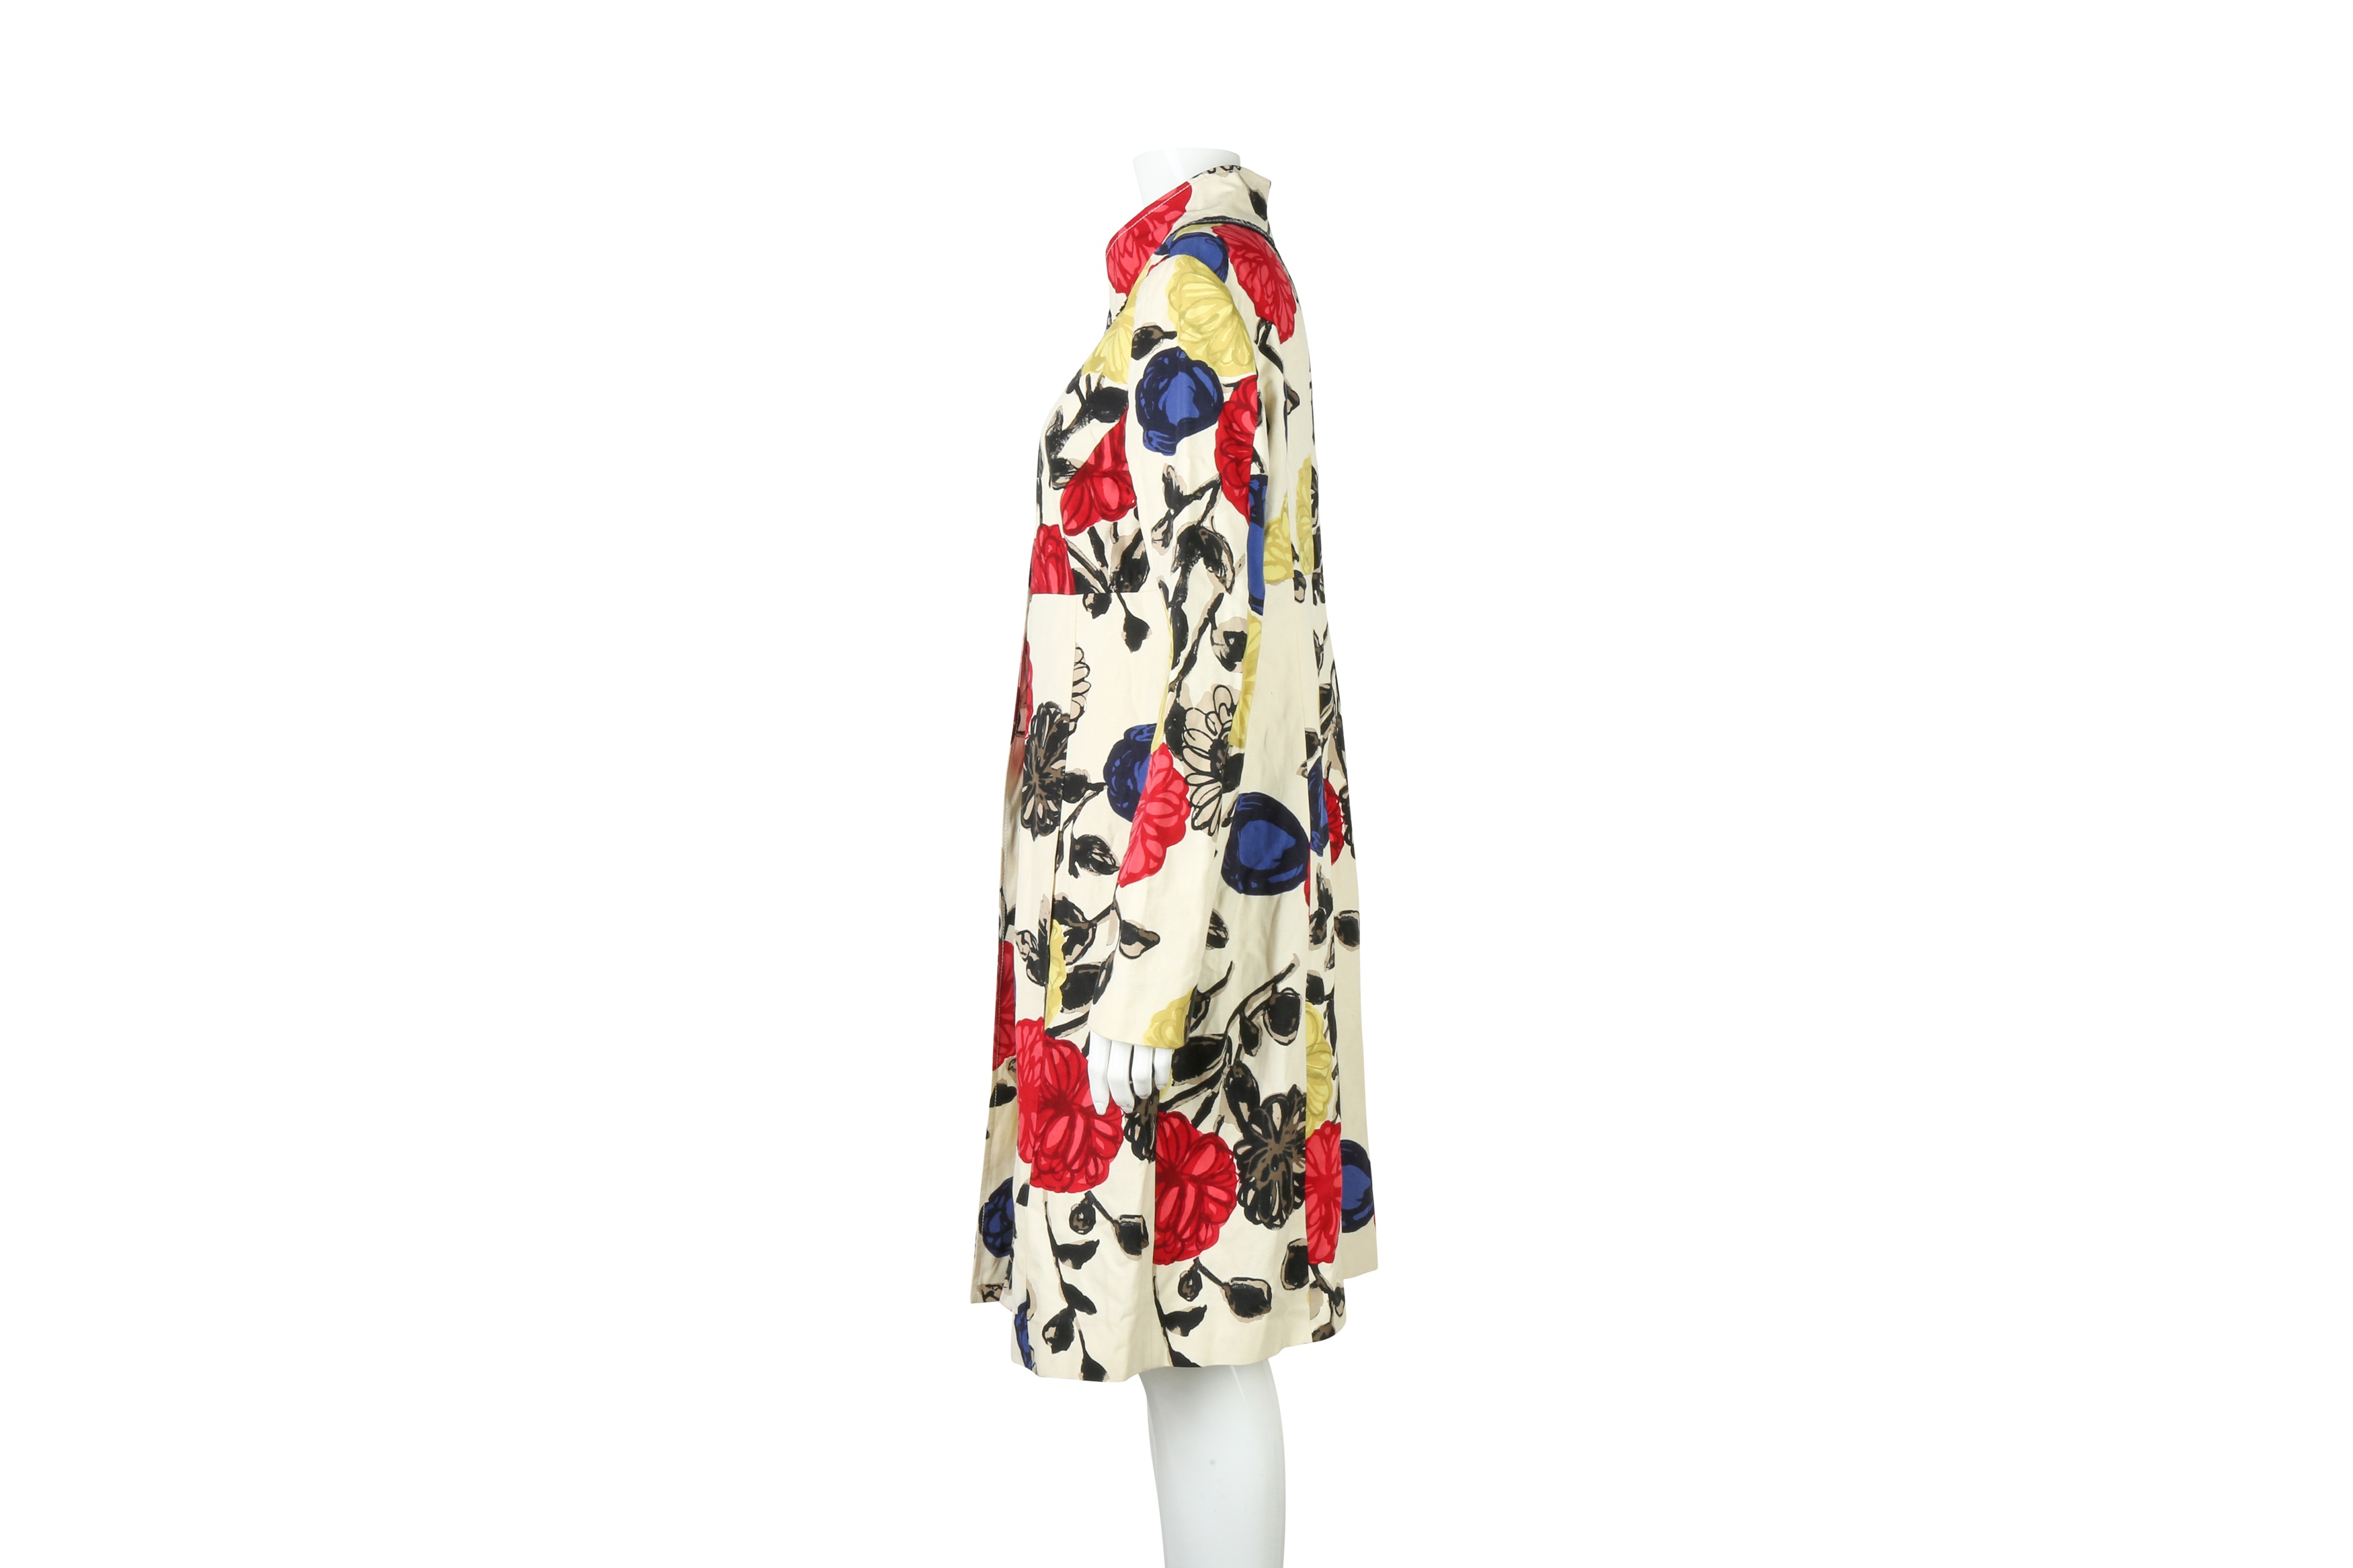 Moschino Cream Linen Floral Print Coat - Size 44 - Image 2 of 5